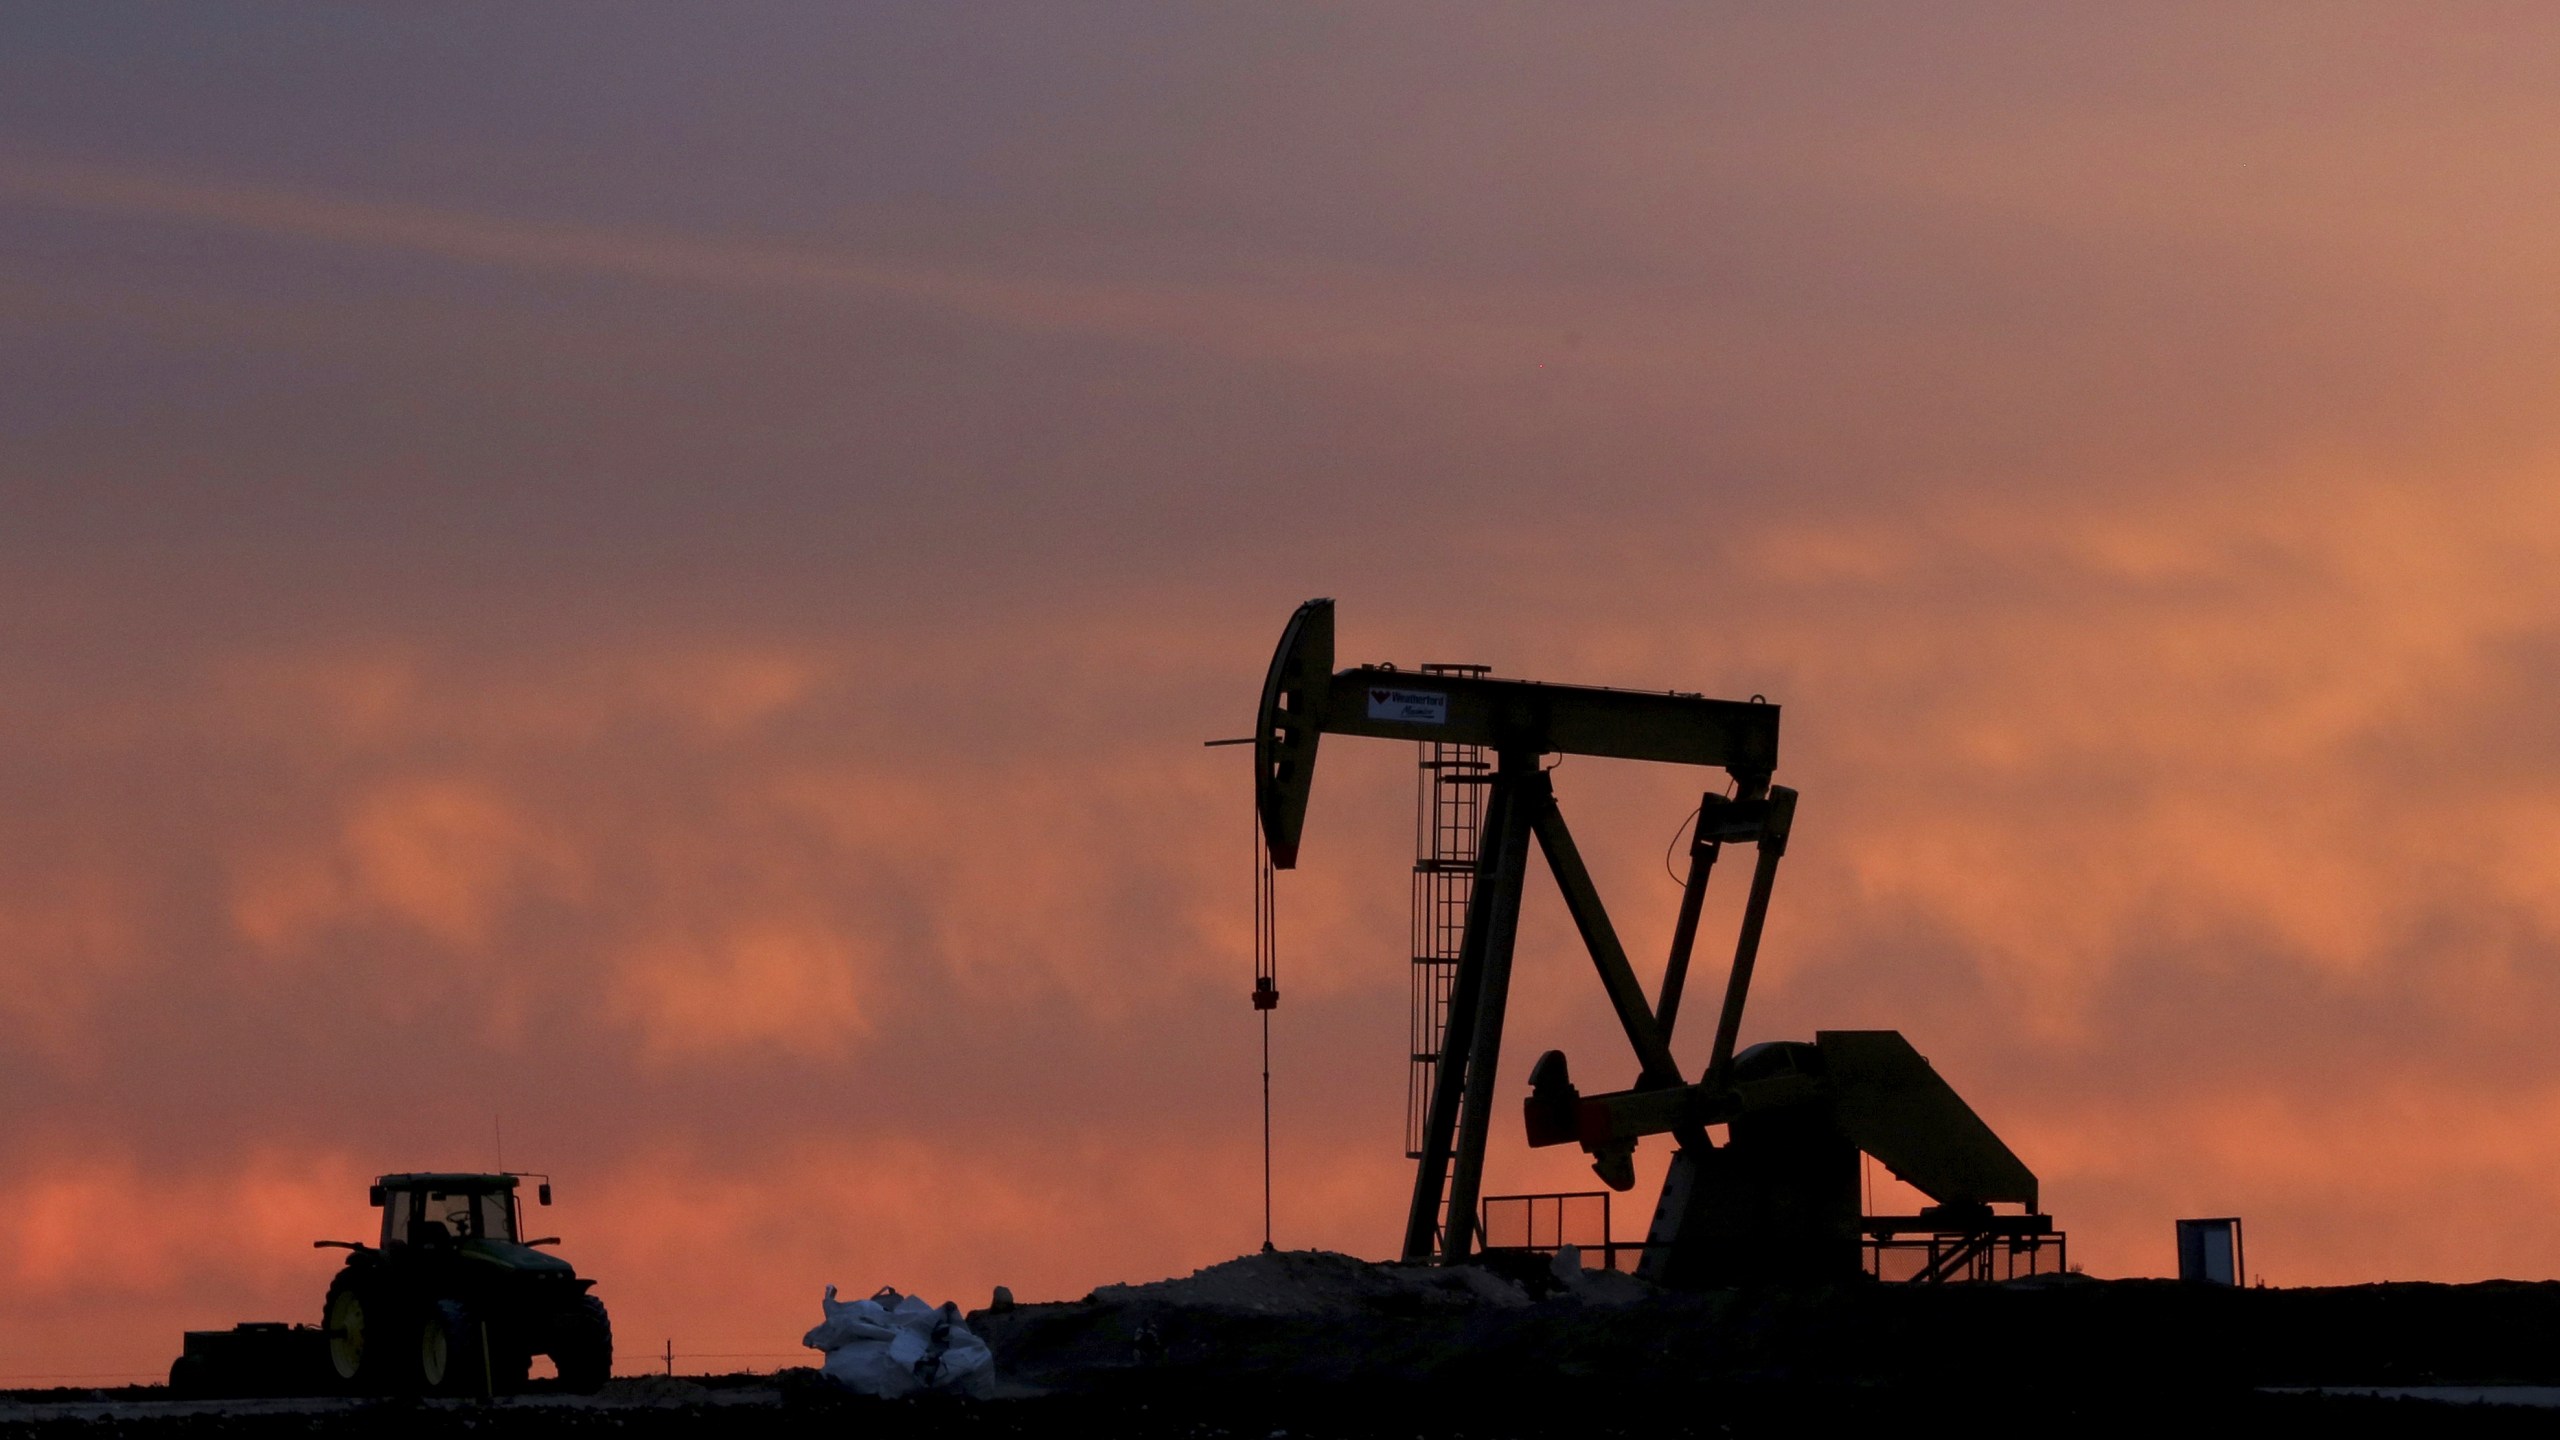 FILE - A well pump works at sunset on a farm near Sweetwater, Texas, on Dec. 22, 2014. Diamondback Energy will buy rival Endeavor Energy Resources in a cash-and-stock deal valued at about $26 billion to create a drilling giant in the Southwest United States. (AP Photo/LM Otero, File)